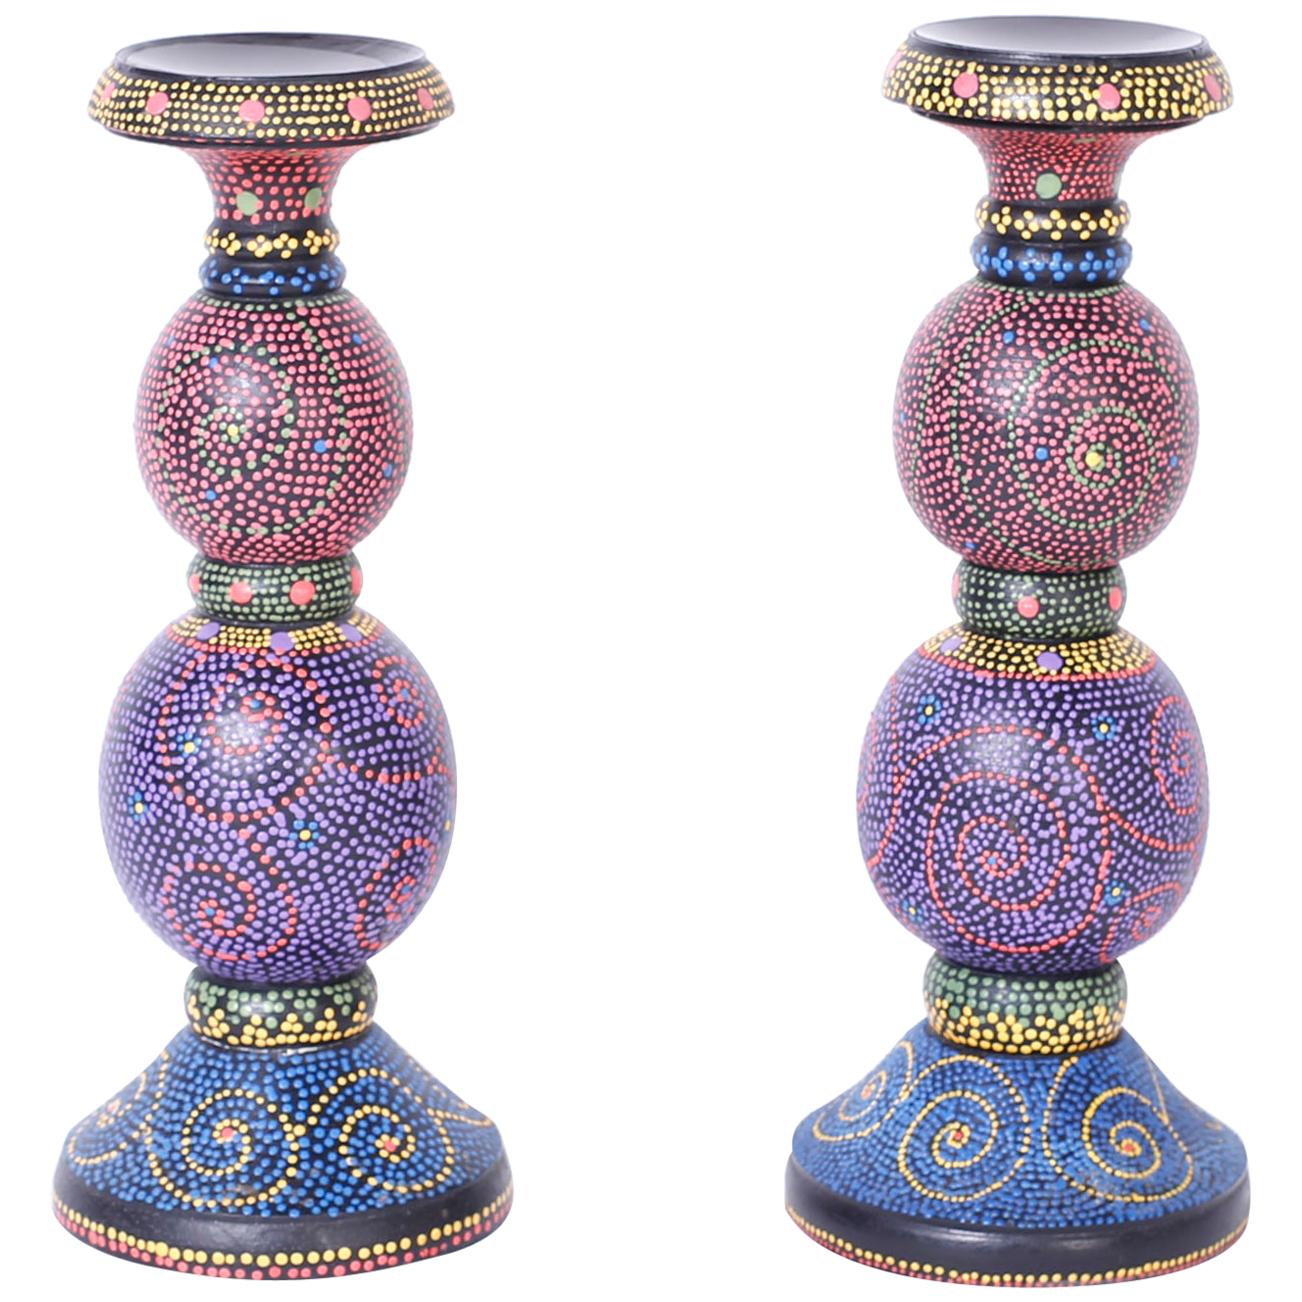 Pair of Painted Indian Candlesticks